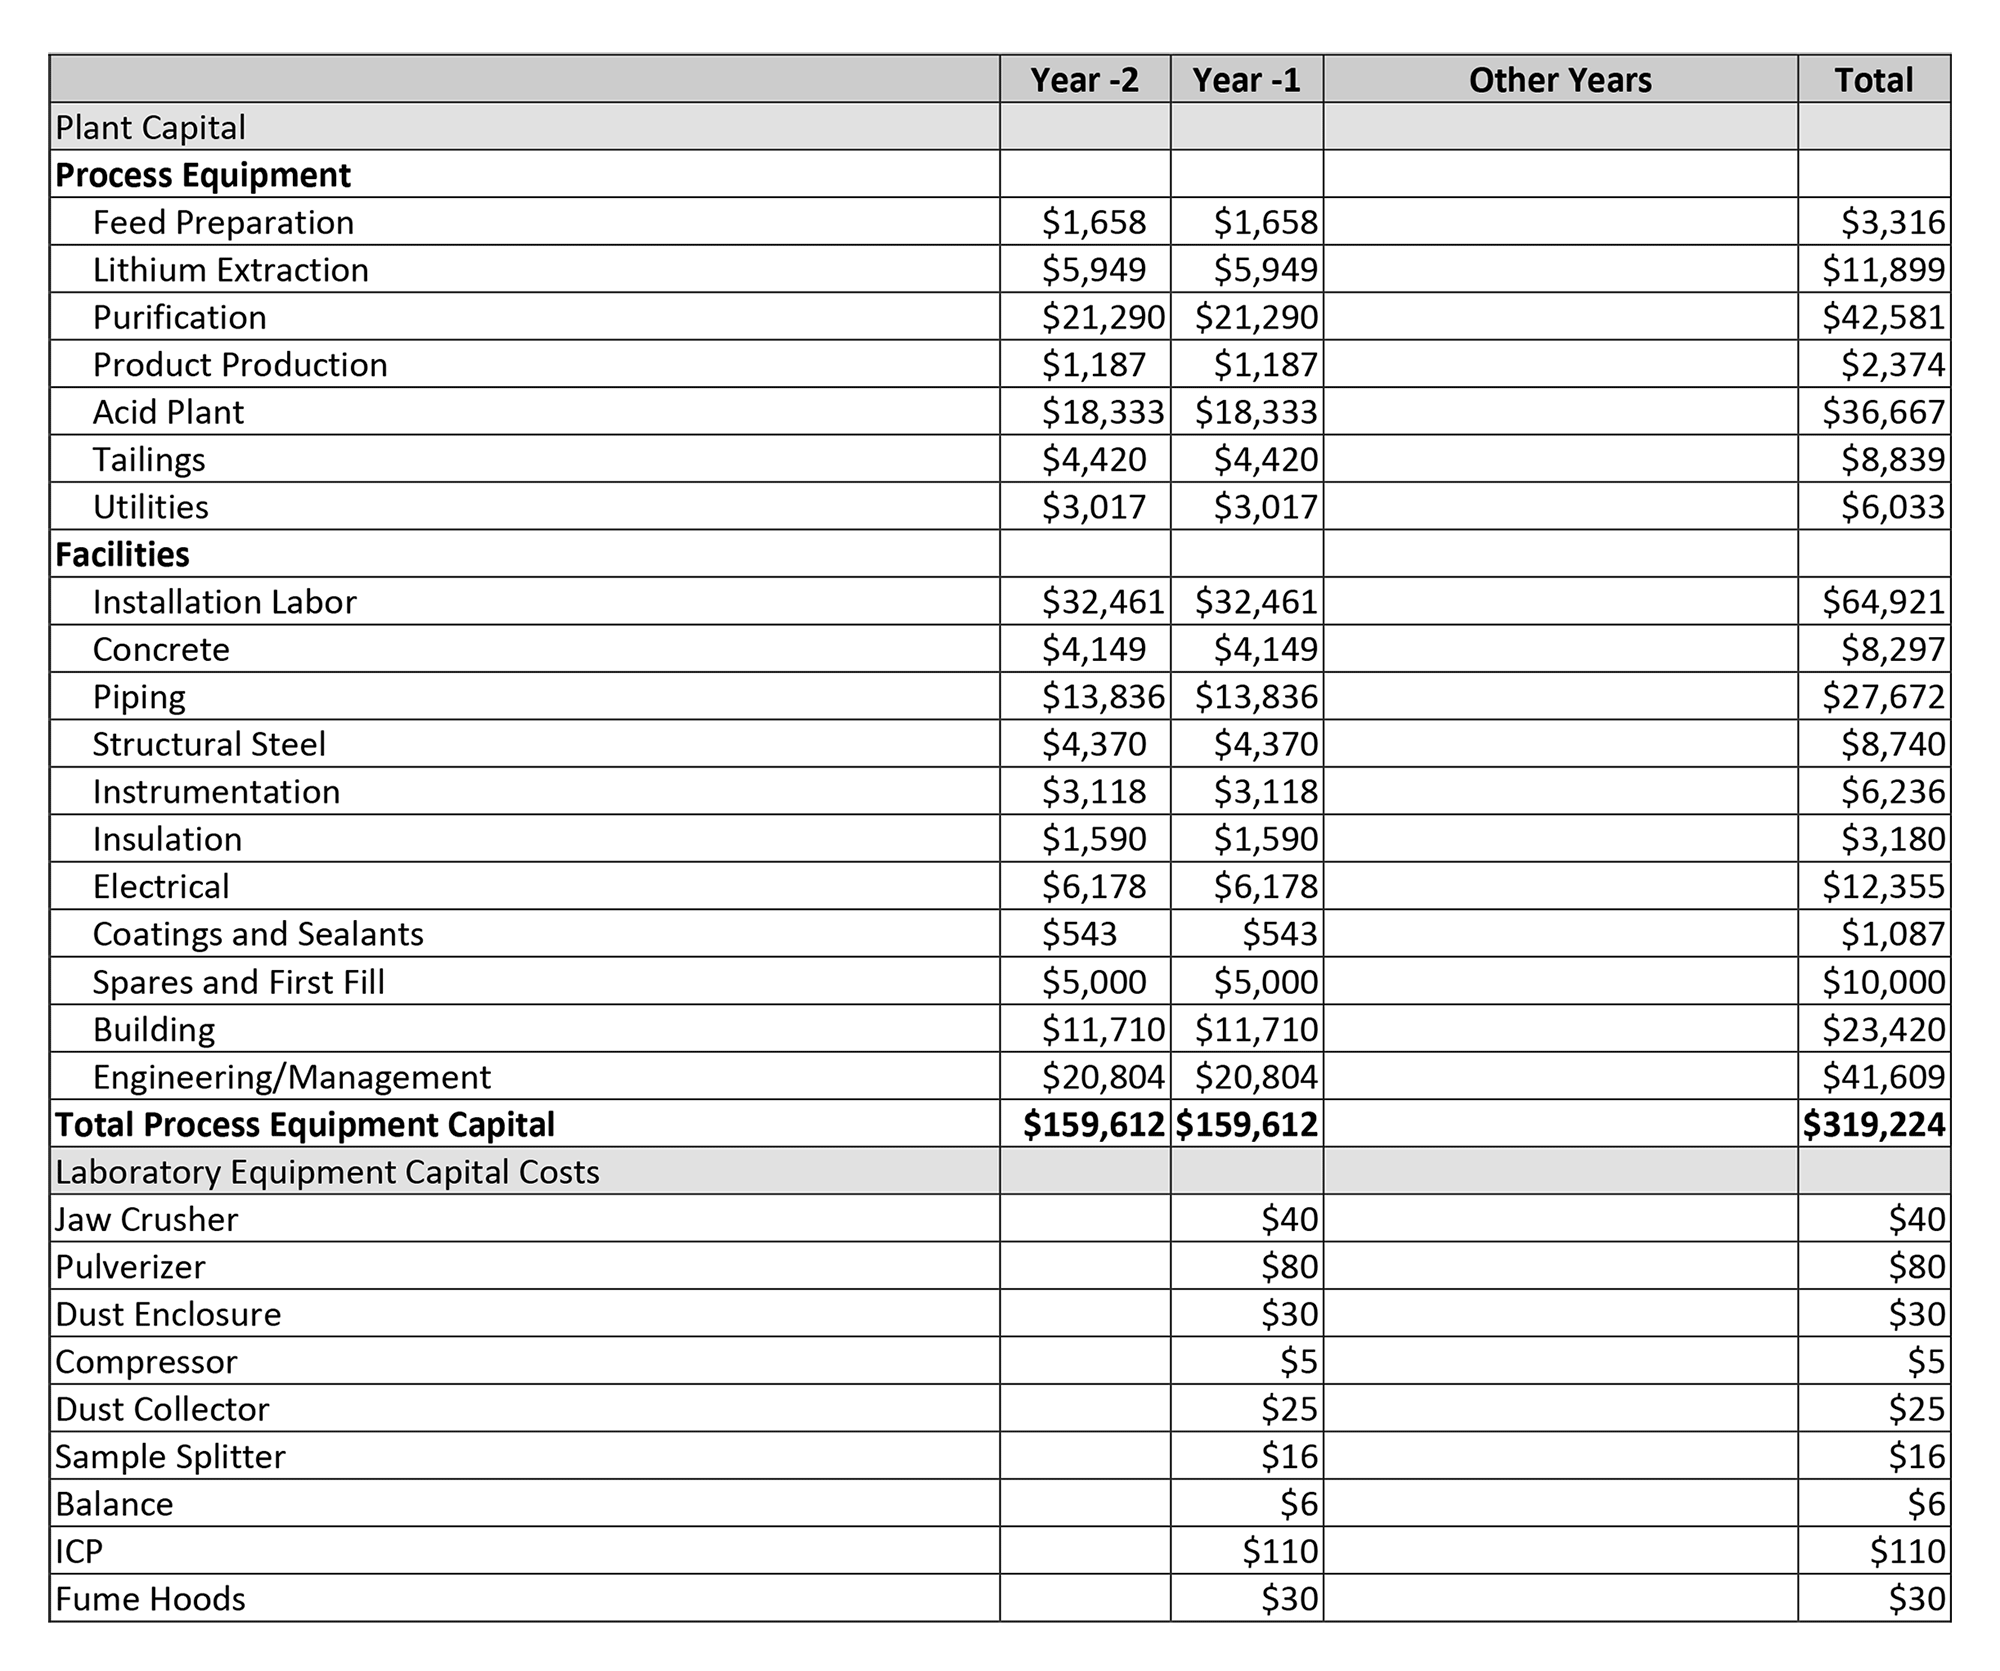 Detail of Capital Costs (000’s)